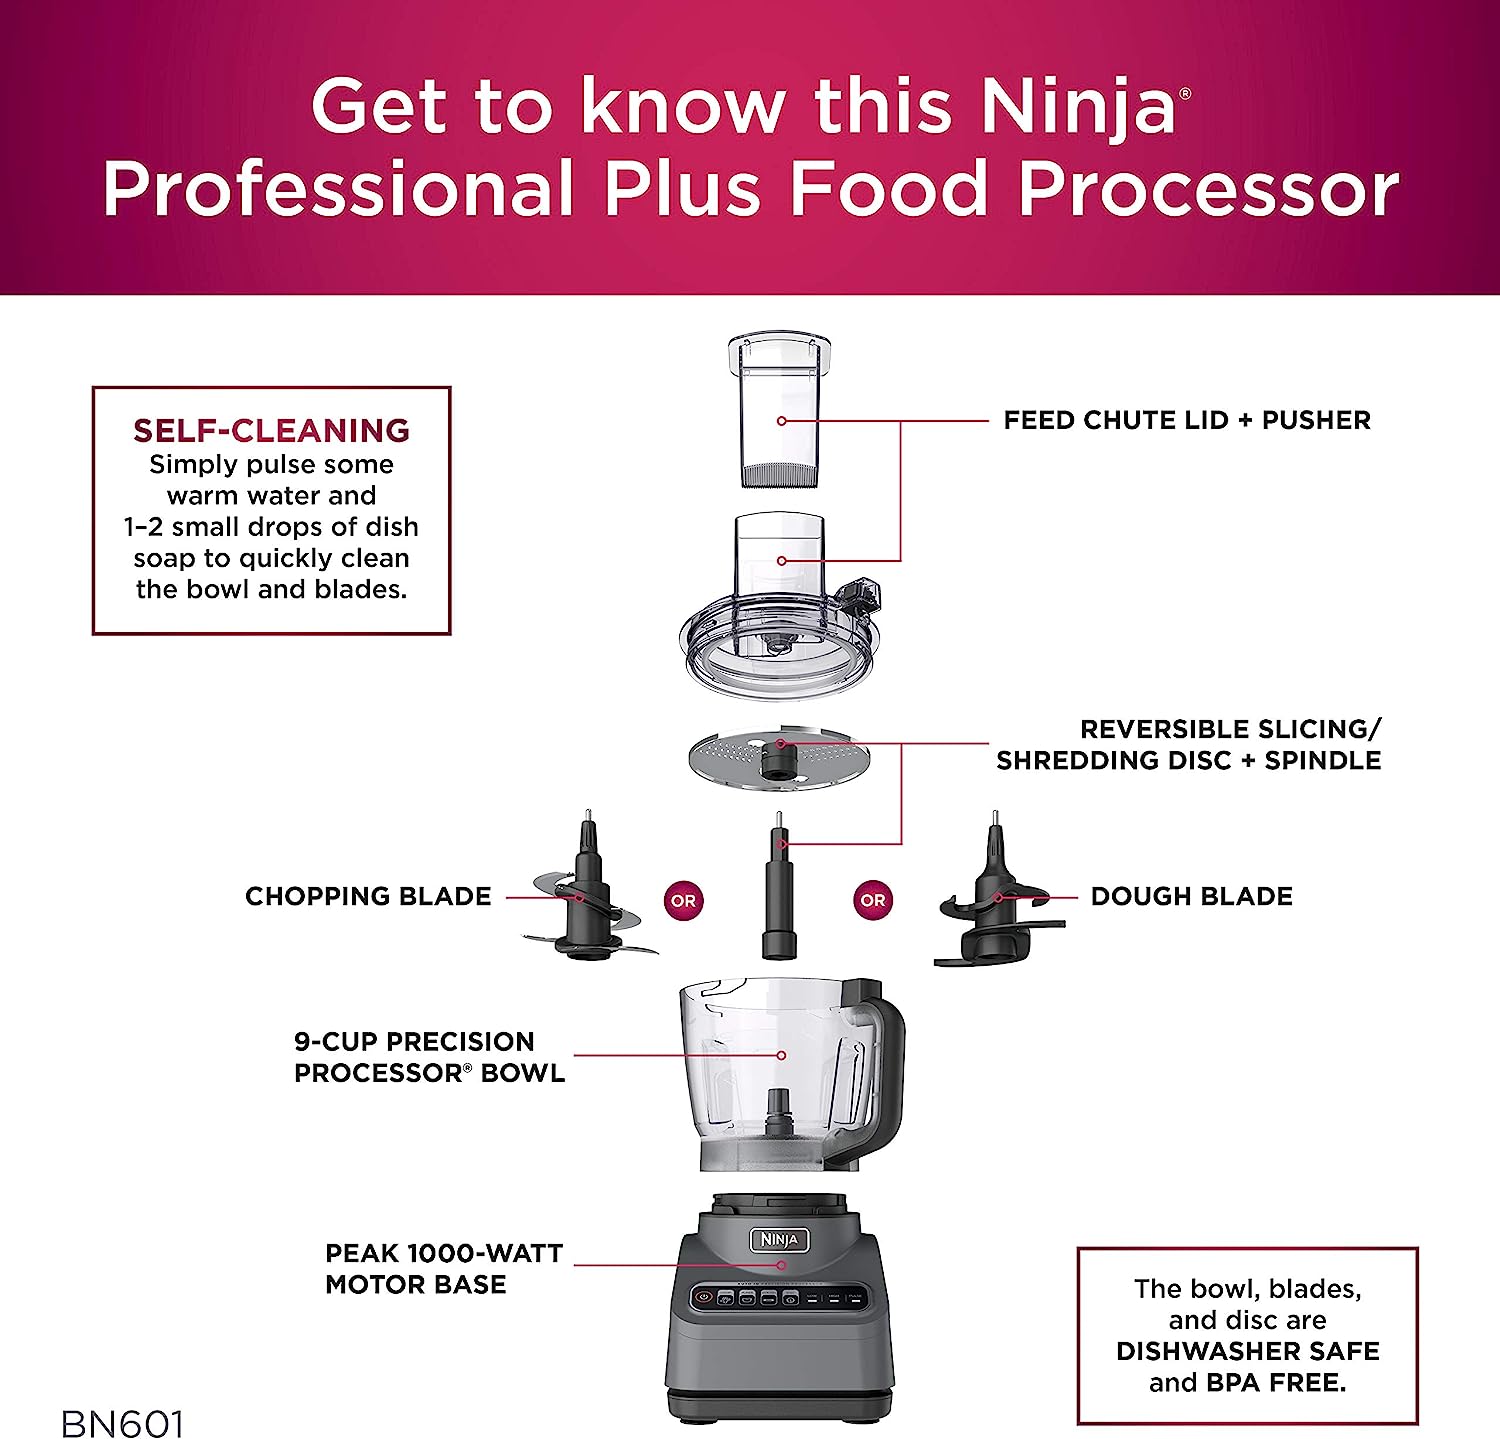 https://bigbigmart.com/wp-content/uploads/2023/08/Ninja-BN601-Professional-Plus-Food-Processor-1000-Peak-Watts-4-Functions-for-Chopping-Slicing-Purees-Dough-with-9-Cup-Processor-Bowl-3-Blades-Food-Chute-Pusher-Silver.-1.jpg